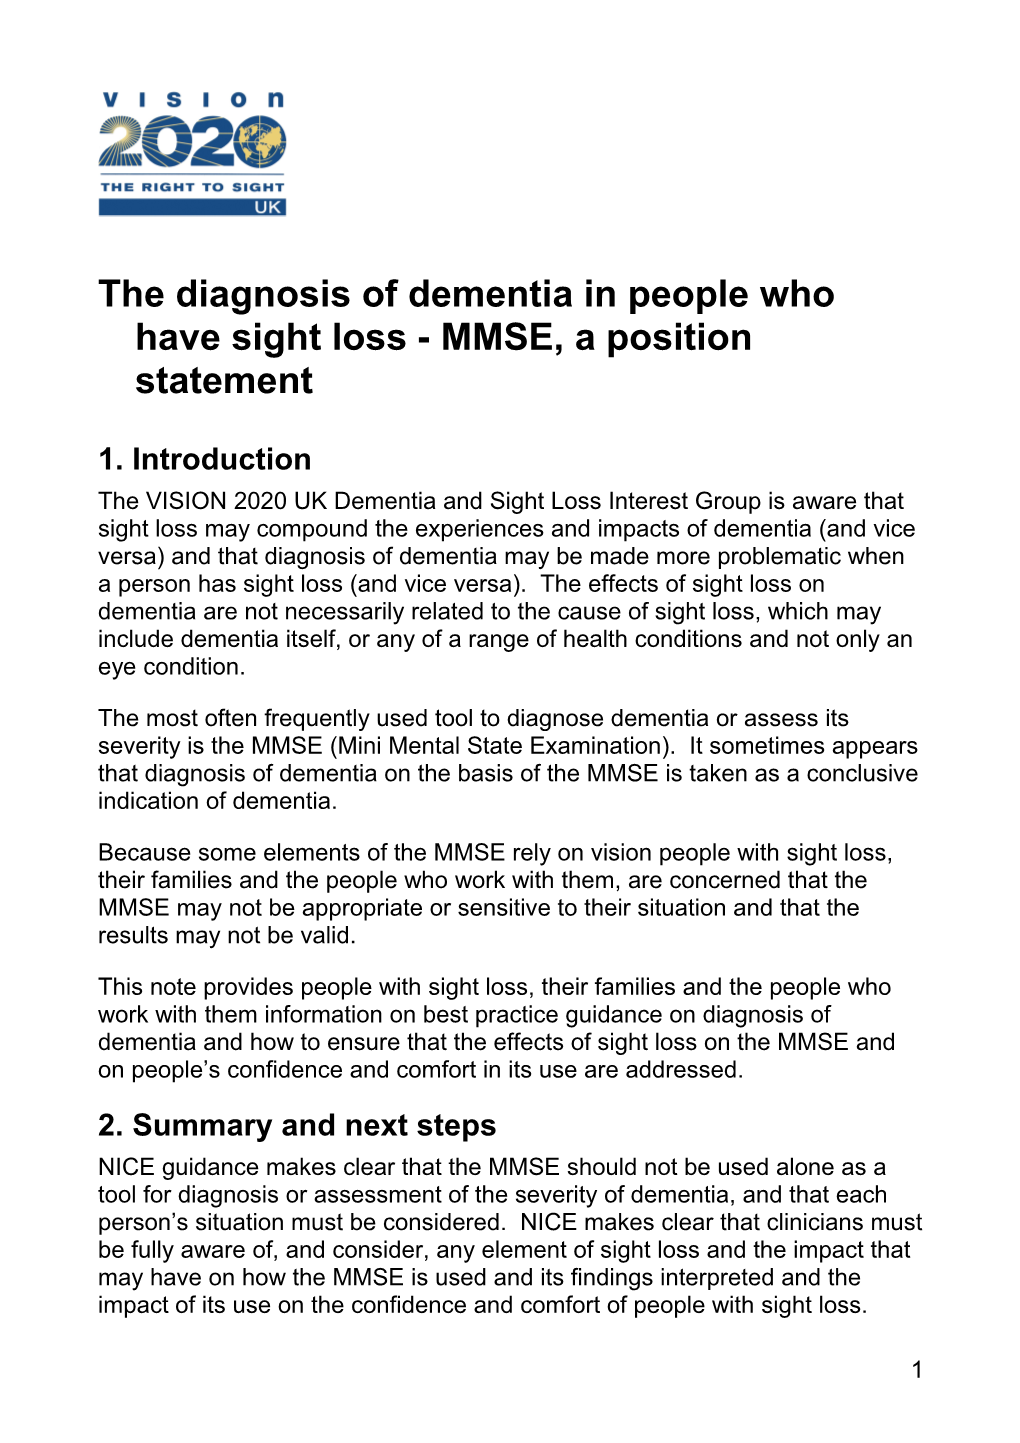 The Dementia and Sight Loss